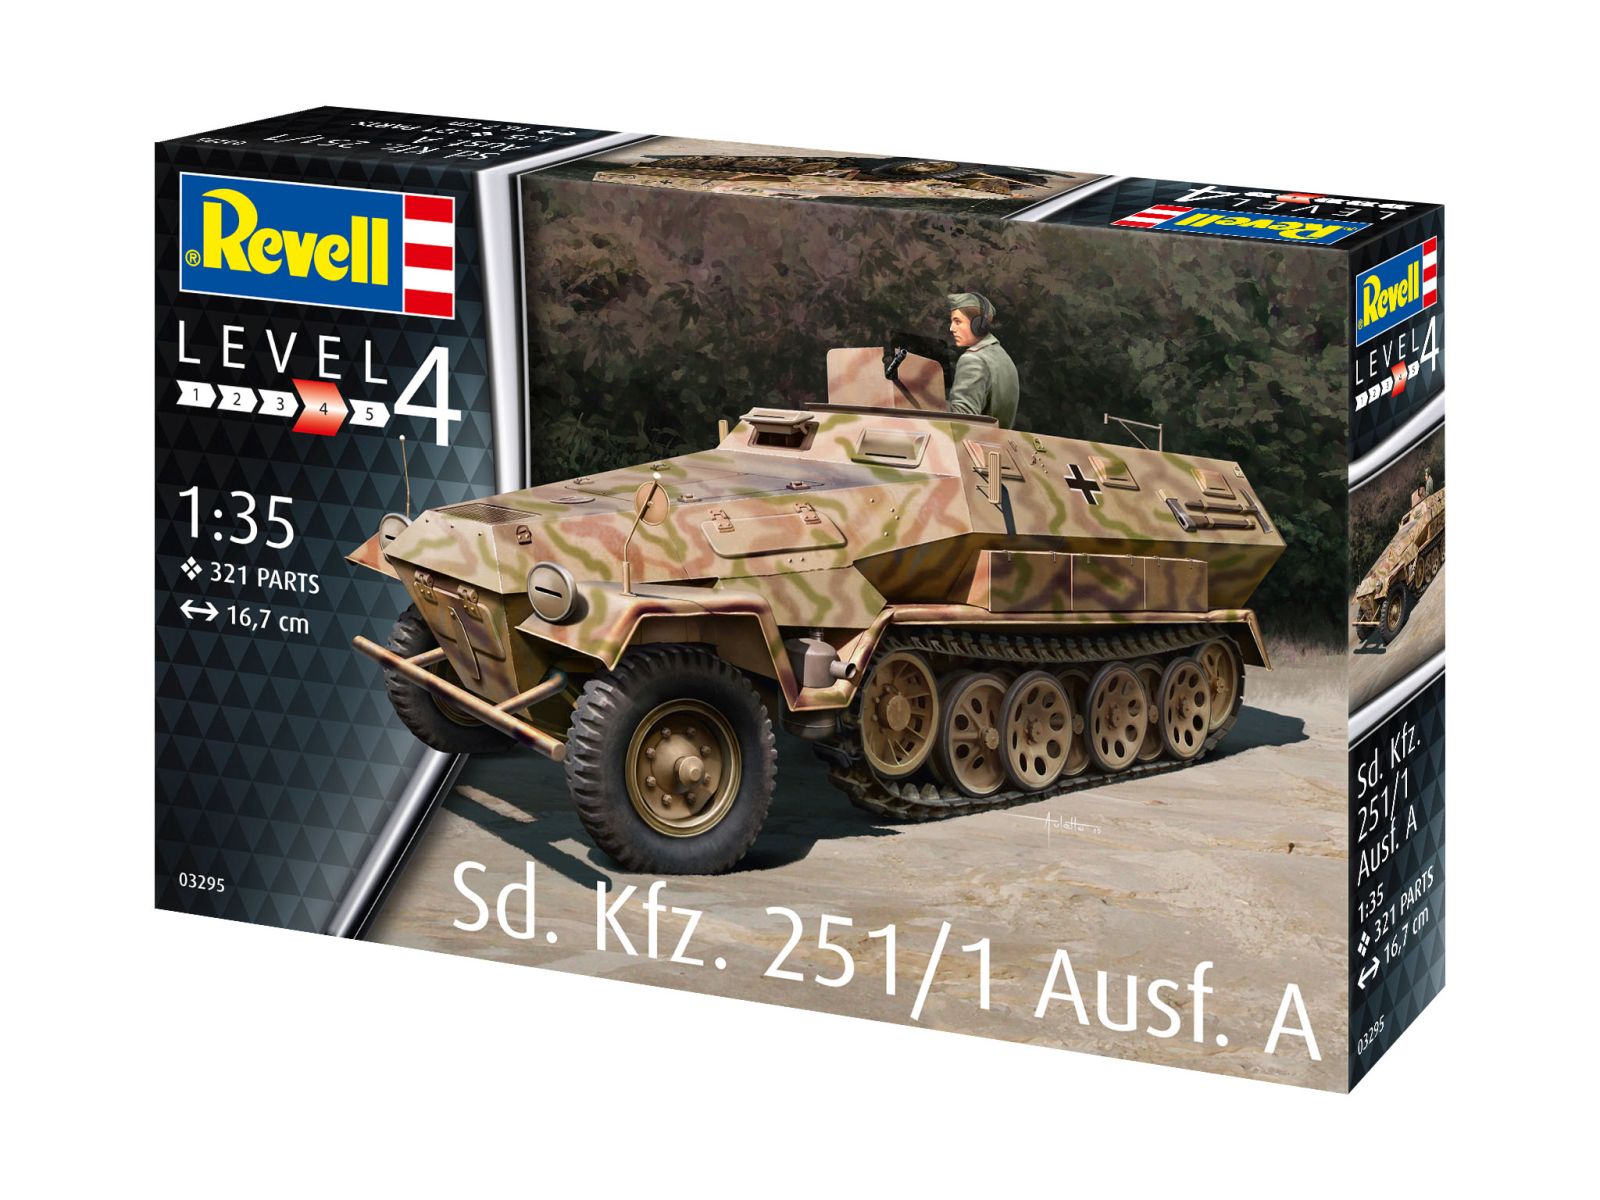 Revell 03295 - Sd.Kfz. 251/1 Ausf.A